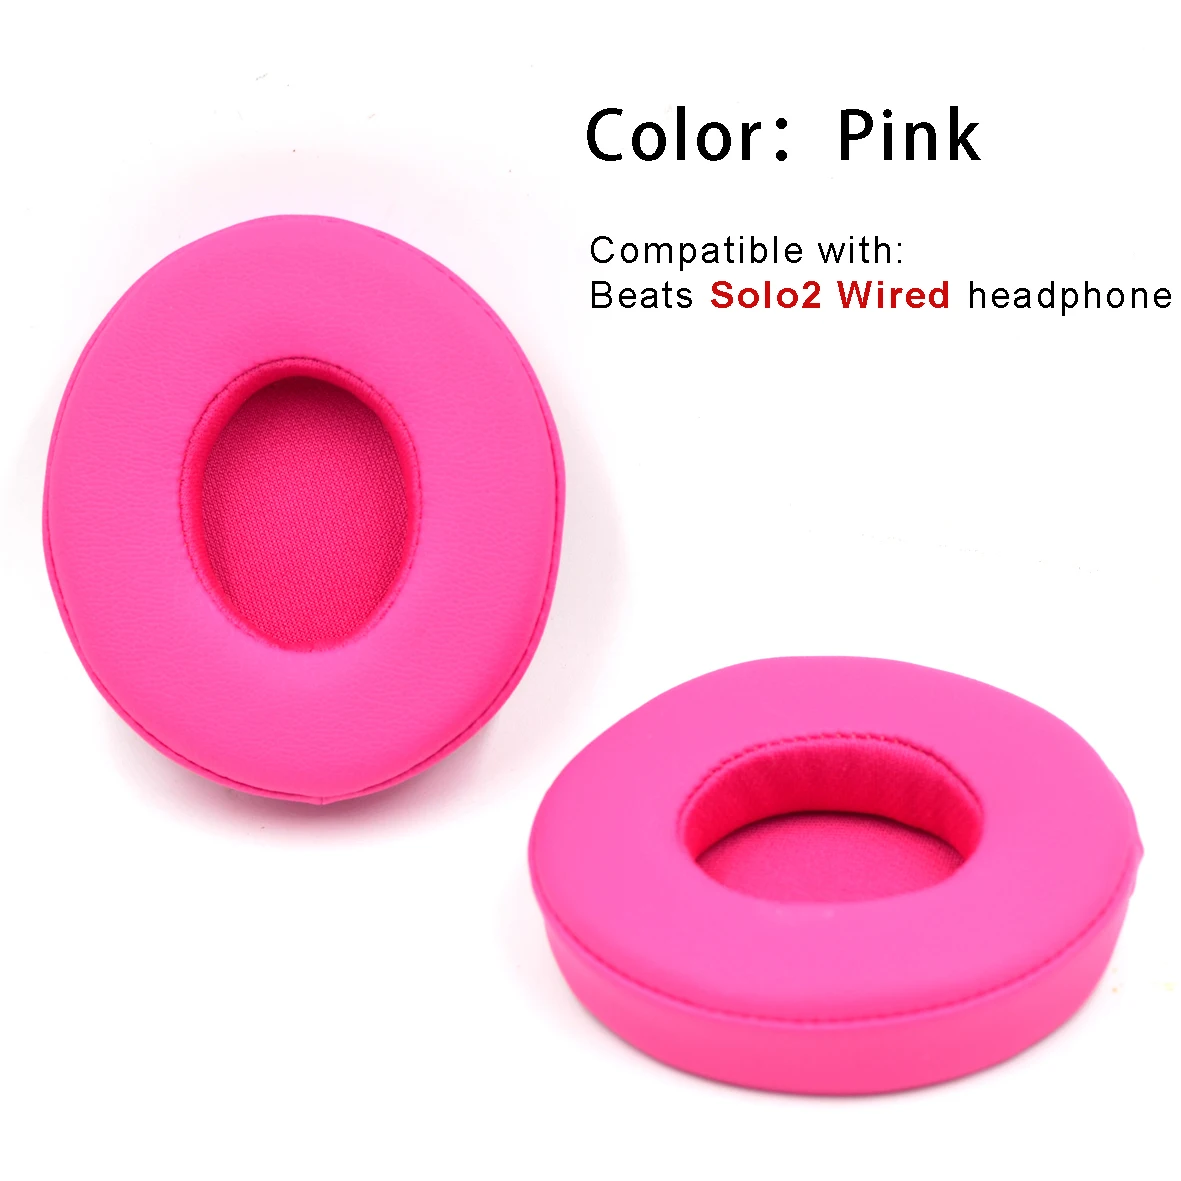 New Replacement Ear Pads Cushion pillow For solo2 solo2.0 solo 2 headphones 